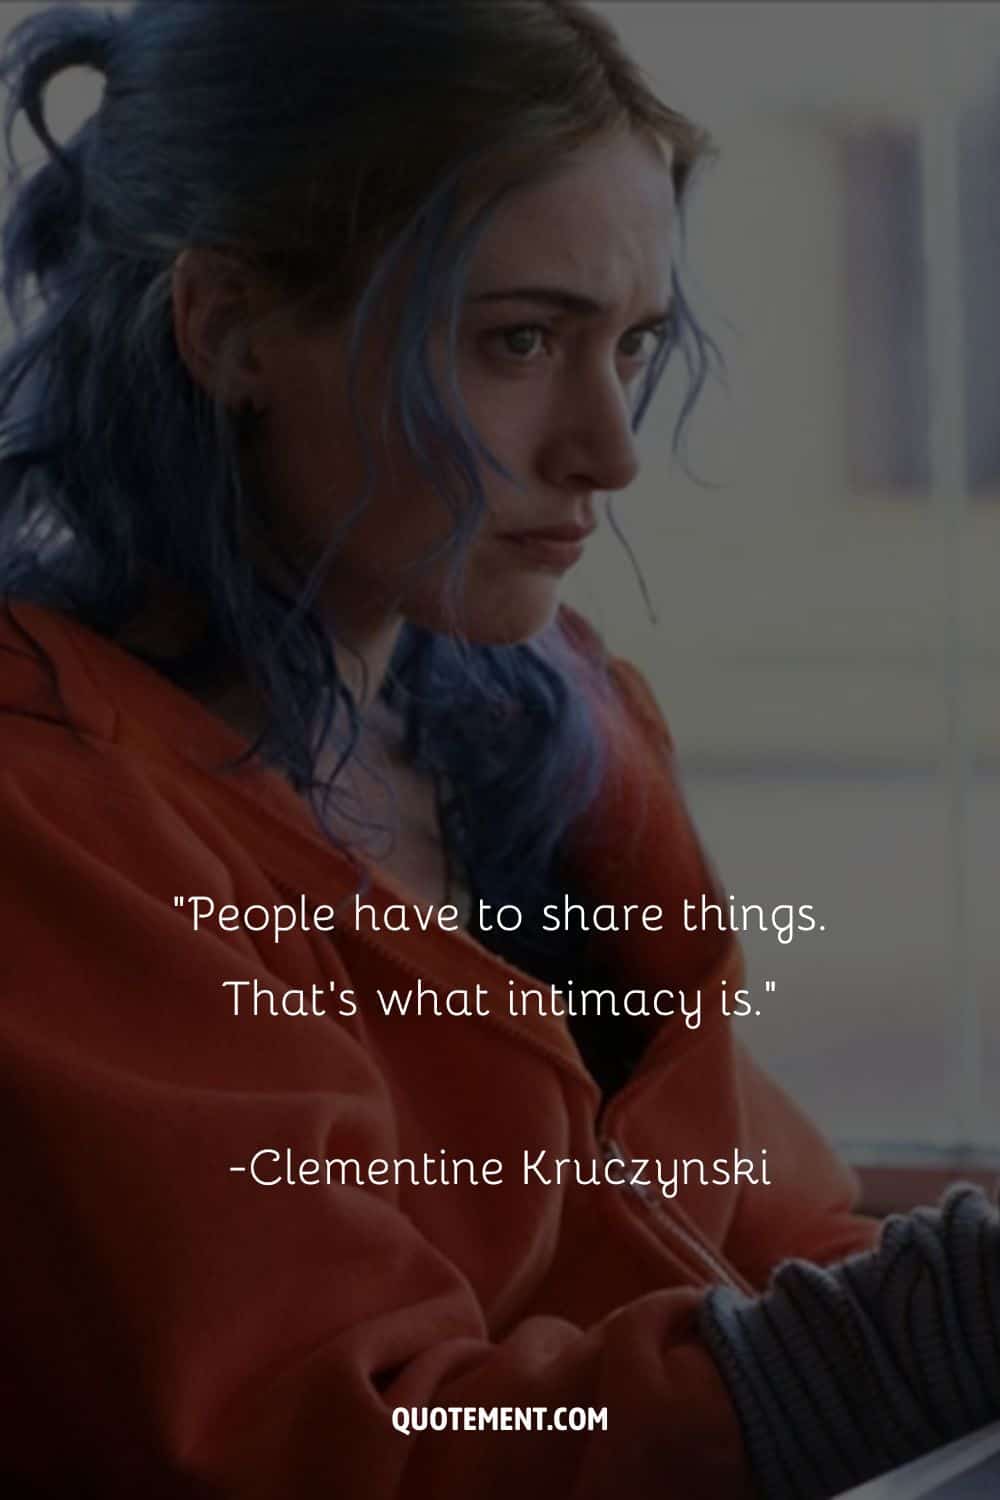 The heart and soul of Eternal Sunshine - Clementine.